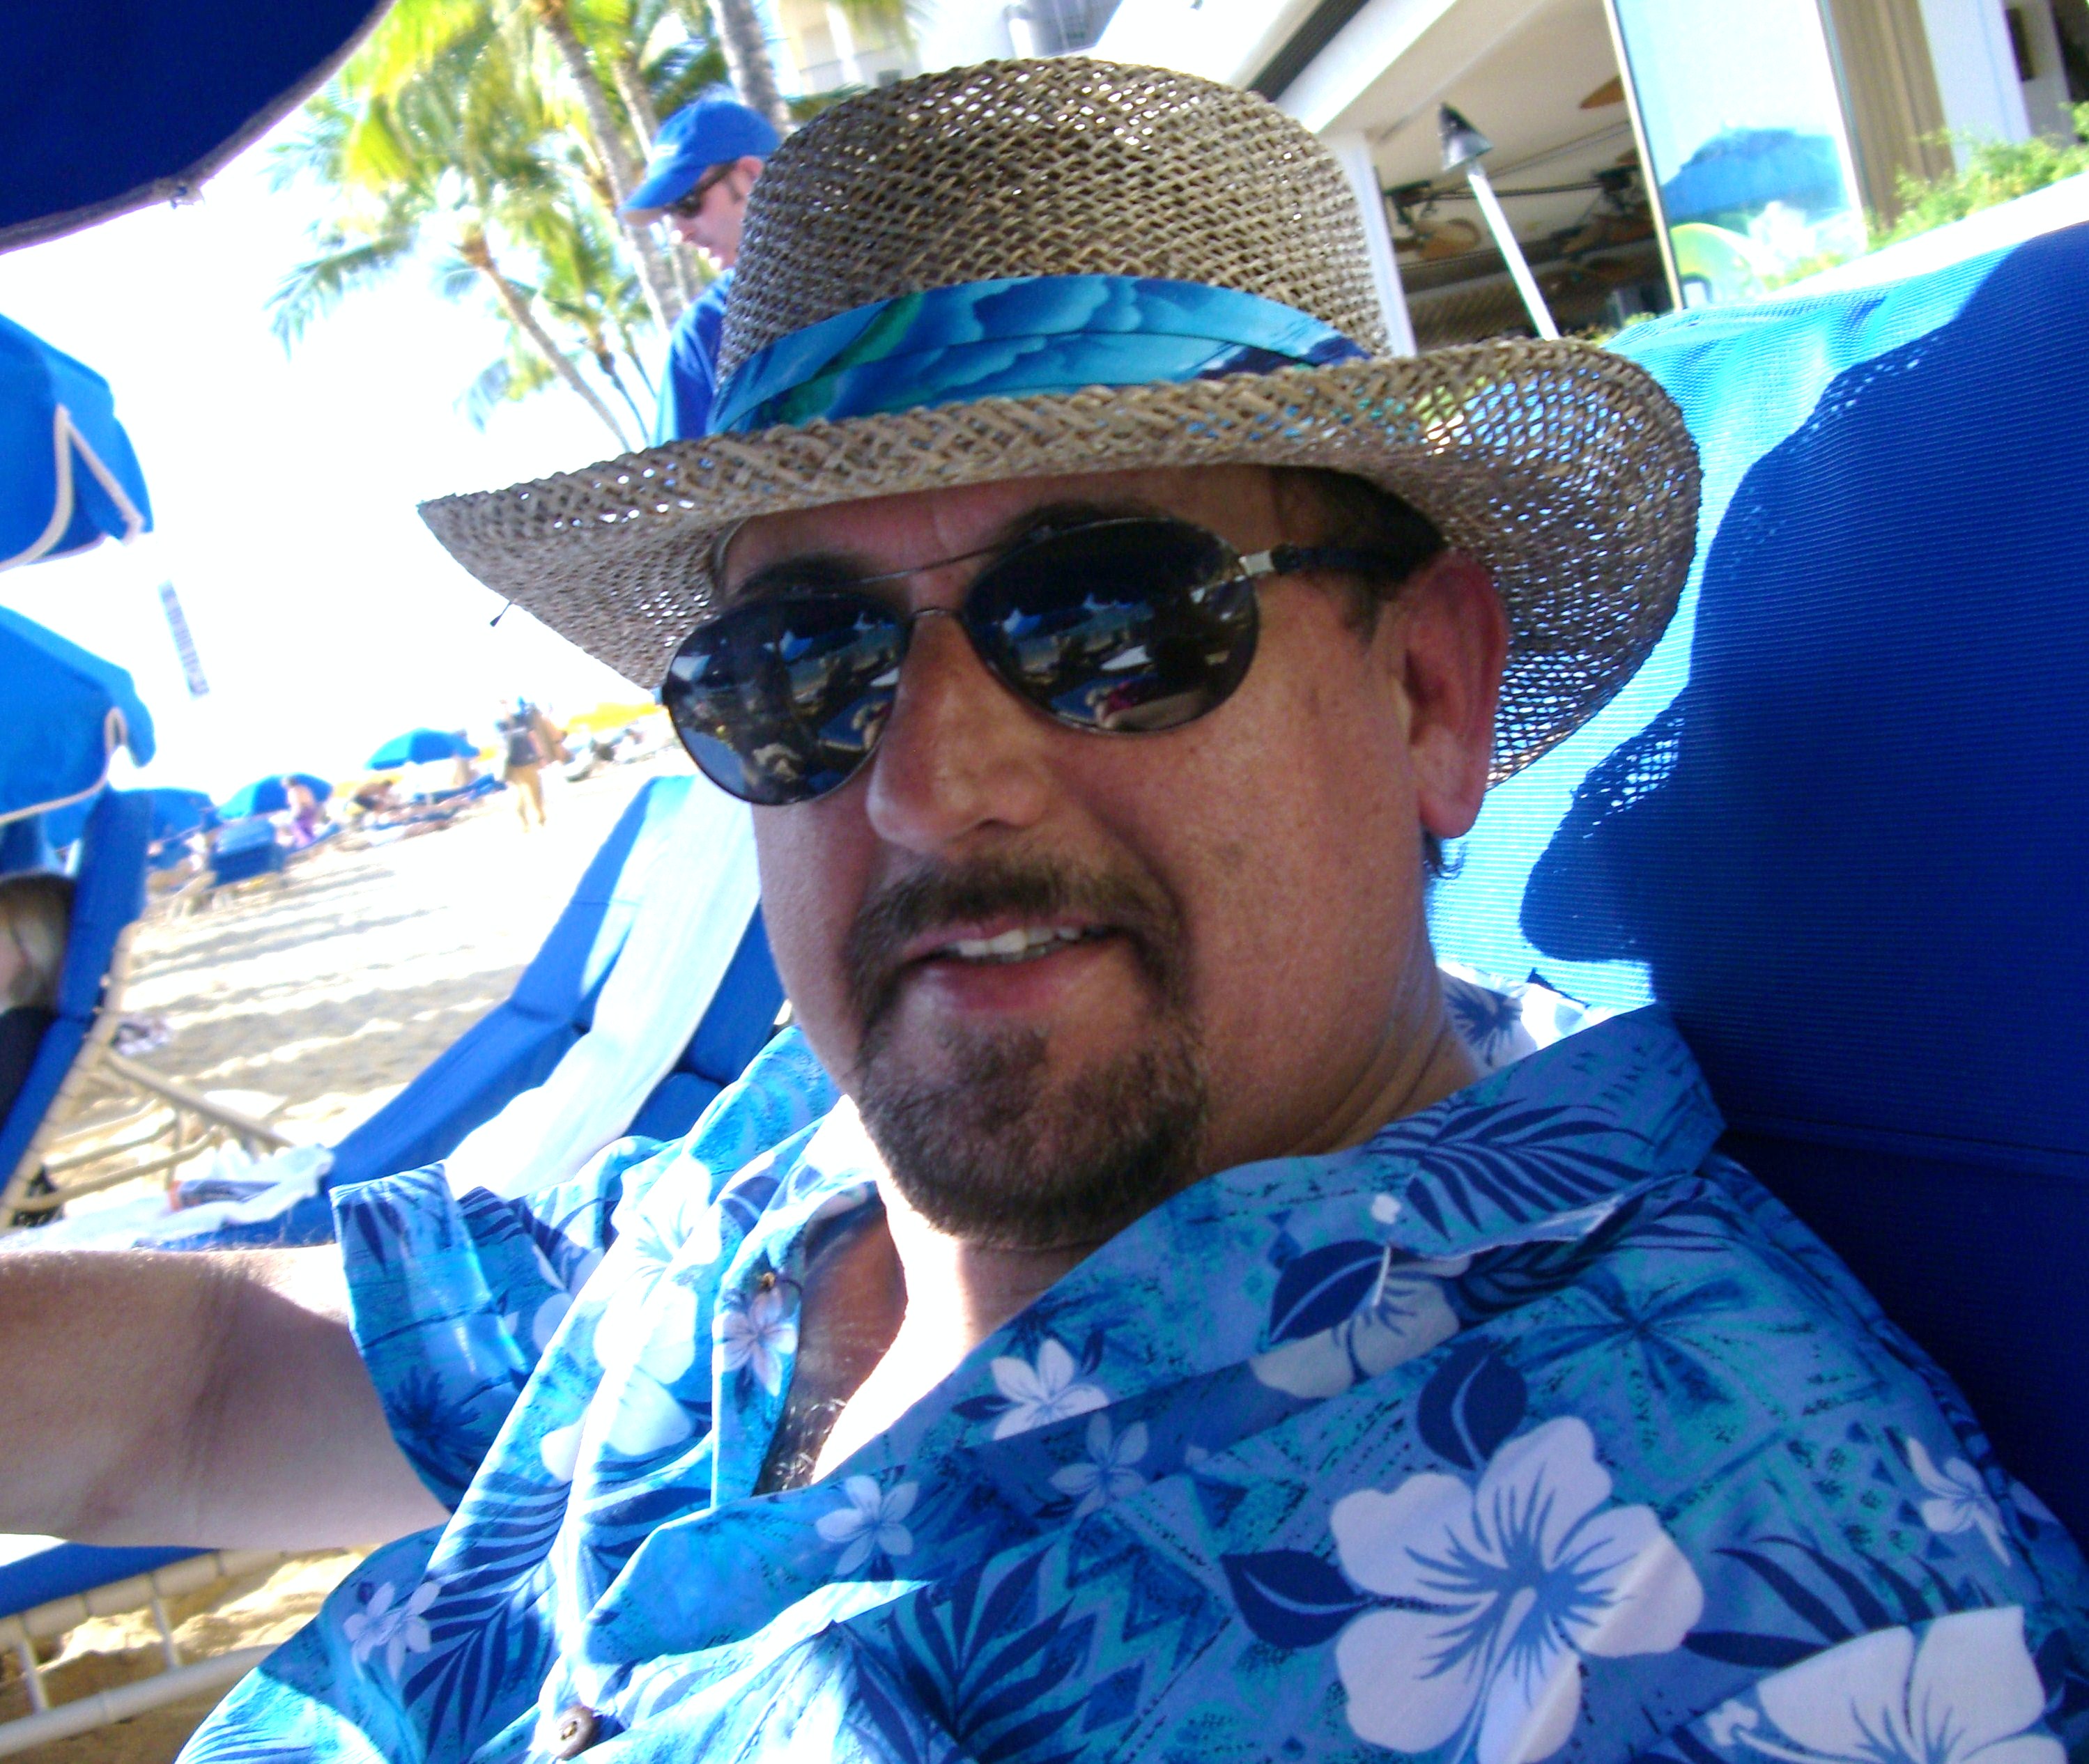 On location in Hawaii filming the ABC series Off The Map (2011) produced by Shonda Rhimes, directed by Randy Zisk